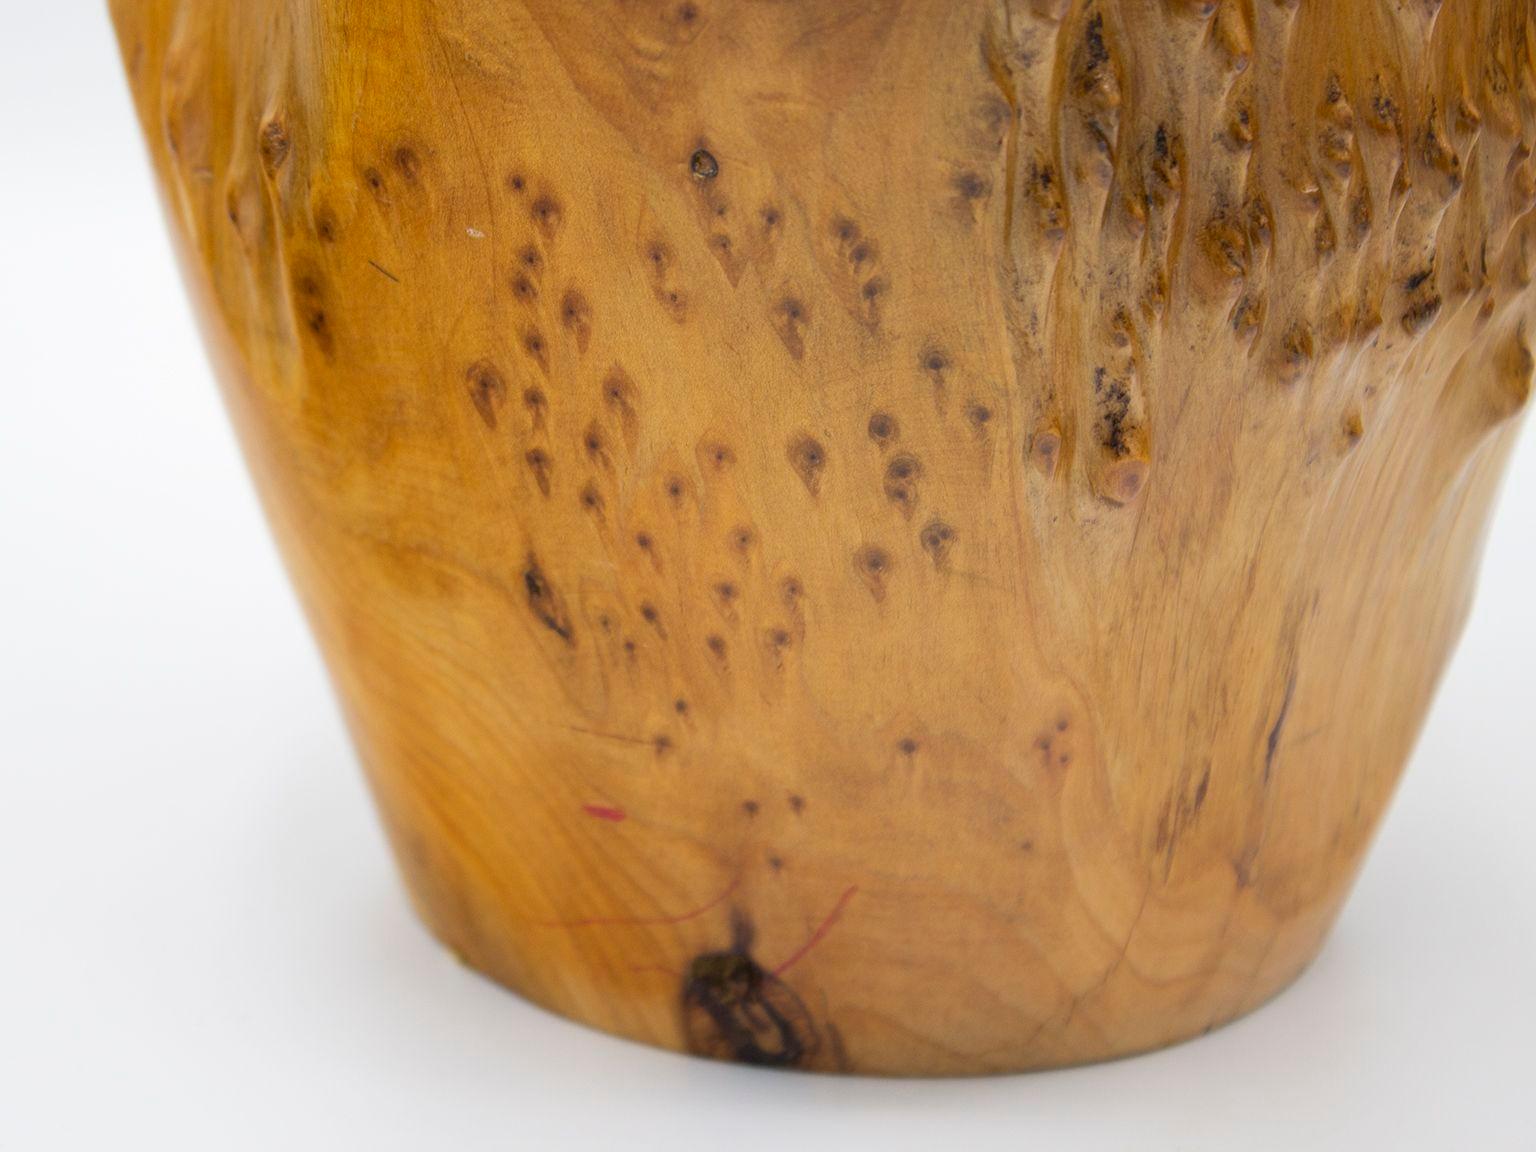 Burl Wood Vessel or Vase in Chinese Fir For Sale 5